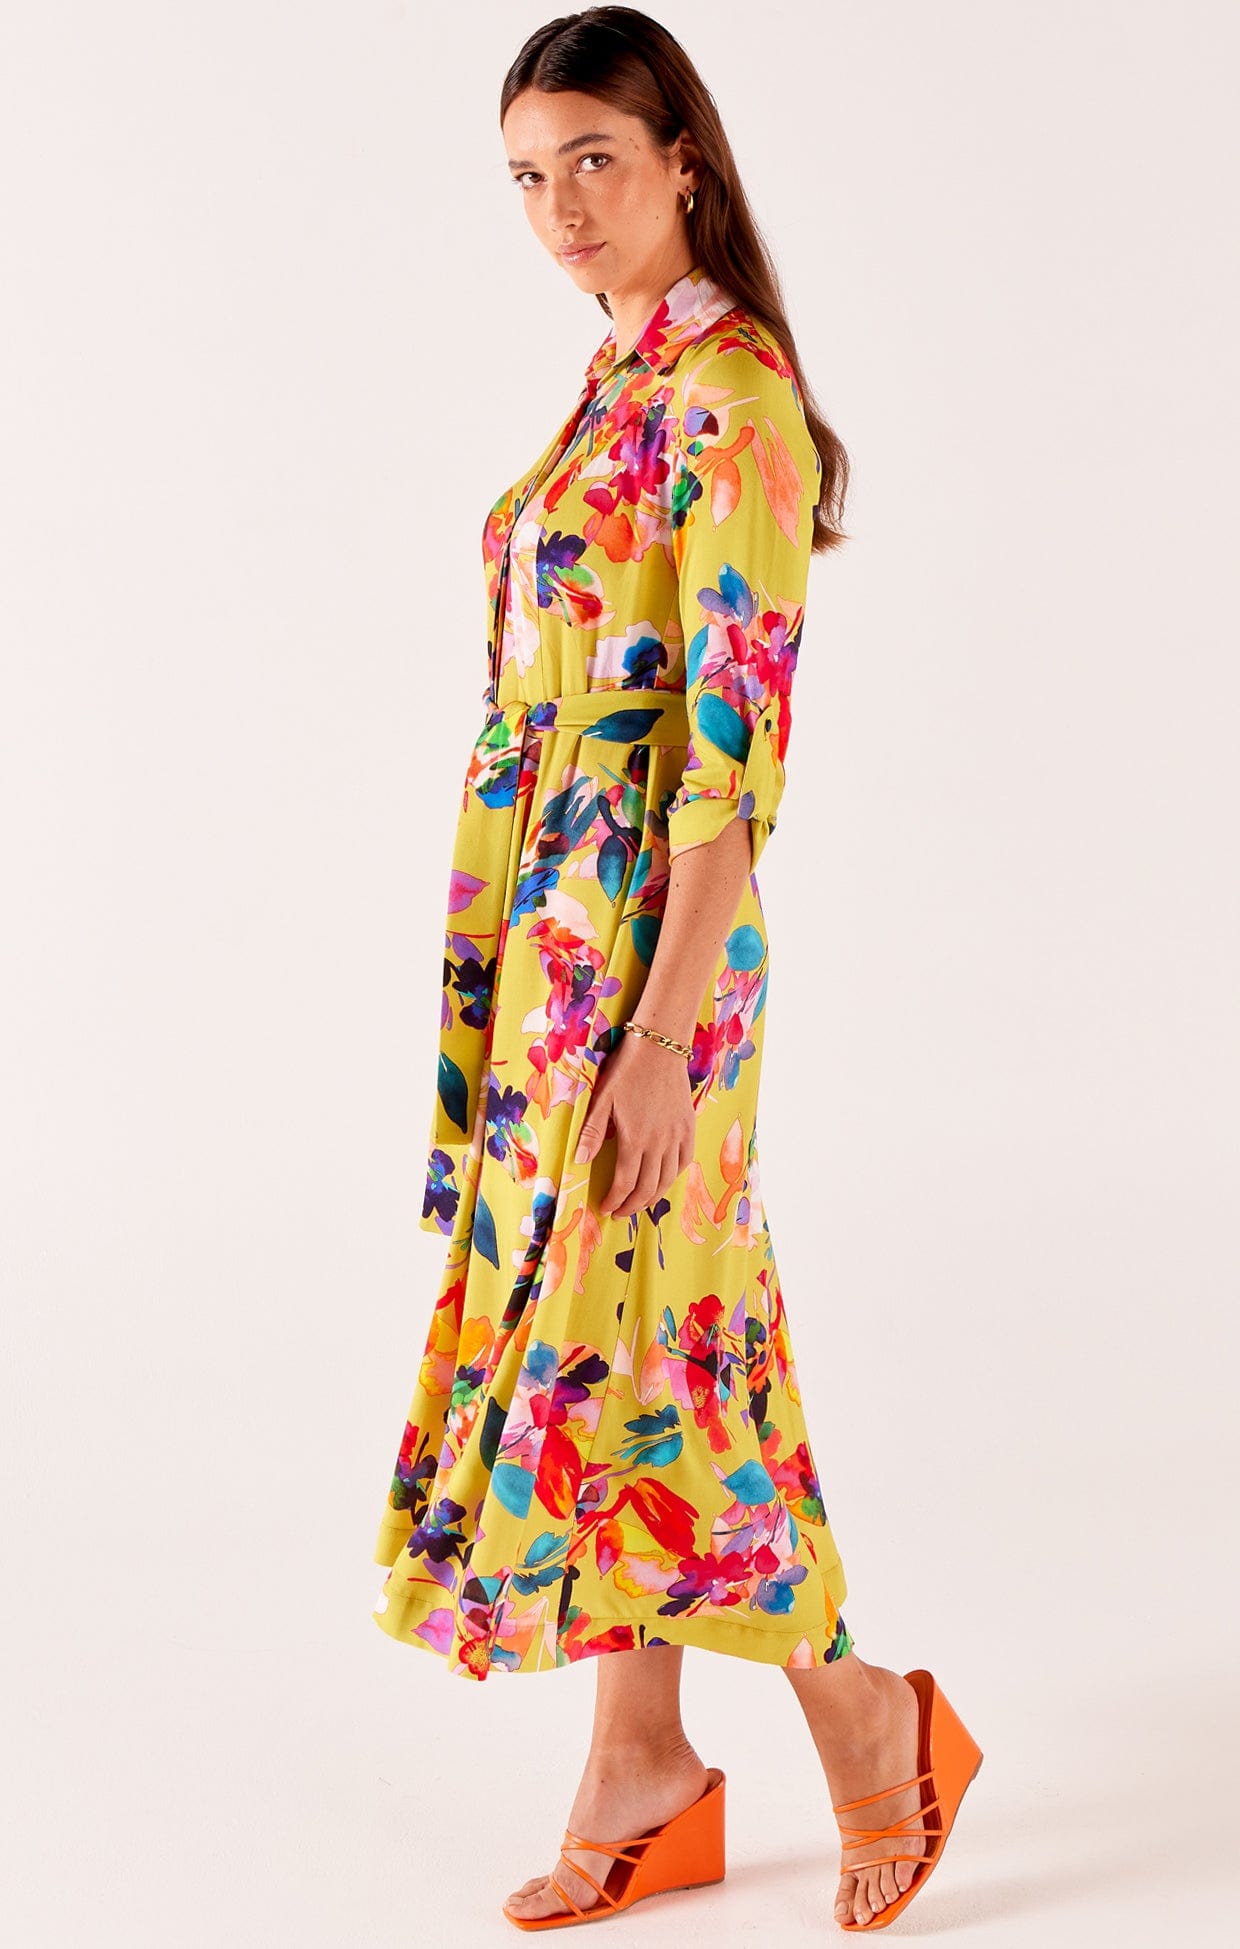 Dresses Multi Occasion RAINBOW ORCHID SHIRTMAKER IN MULTI FLORAL